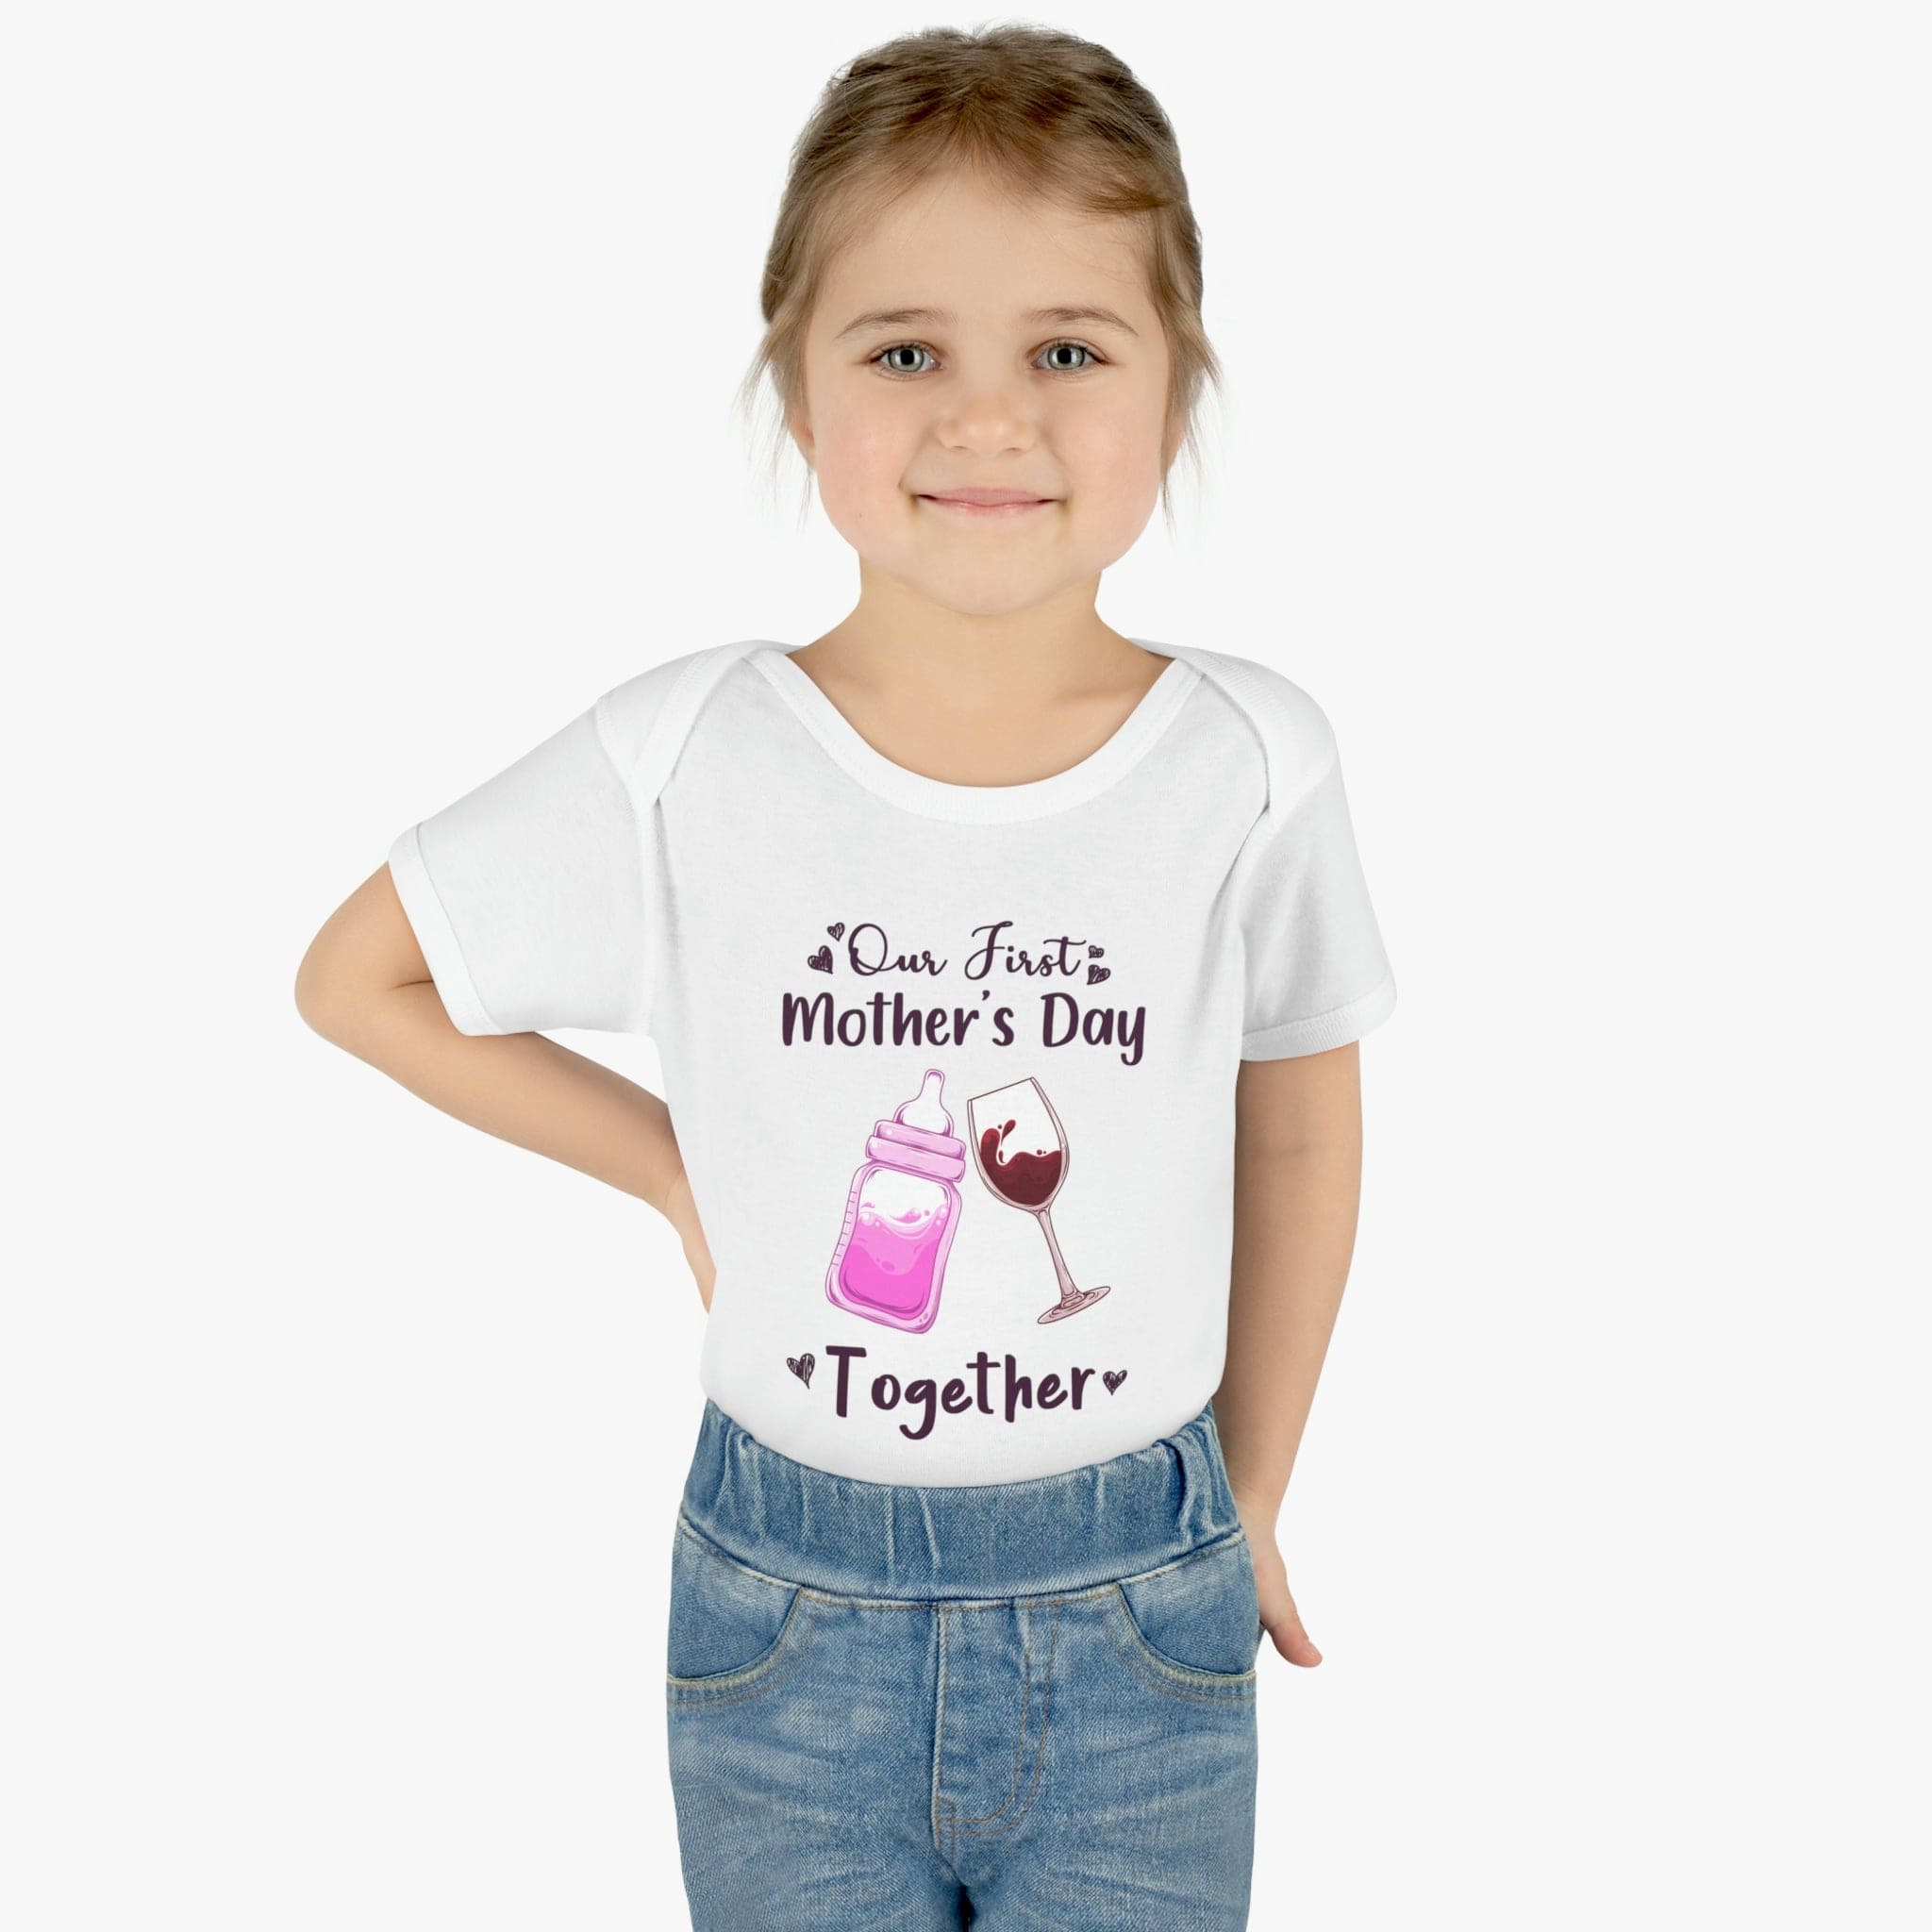 Our first mother's Day Together Infant Baby Bodysuit